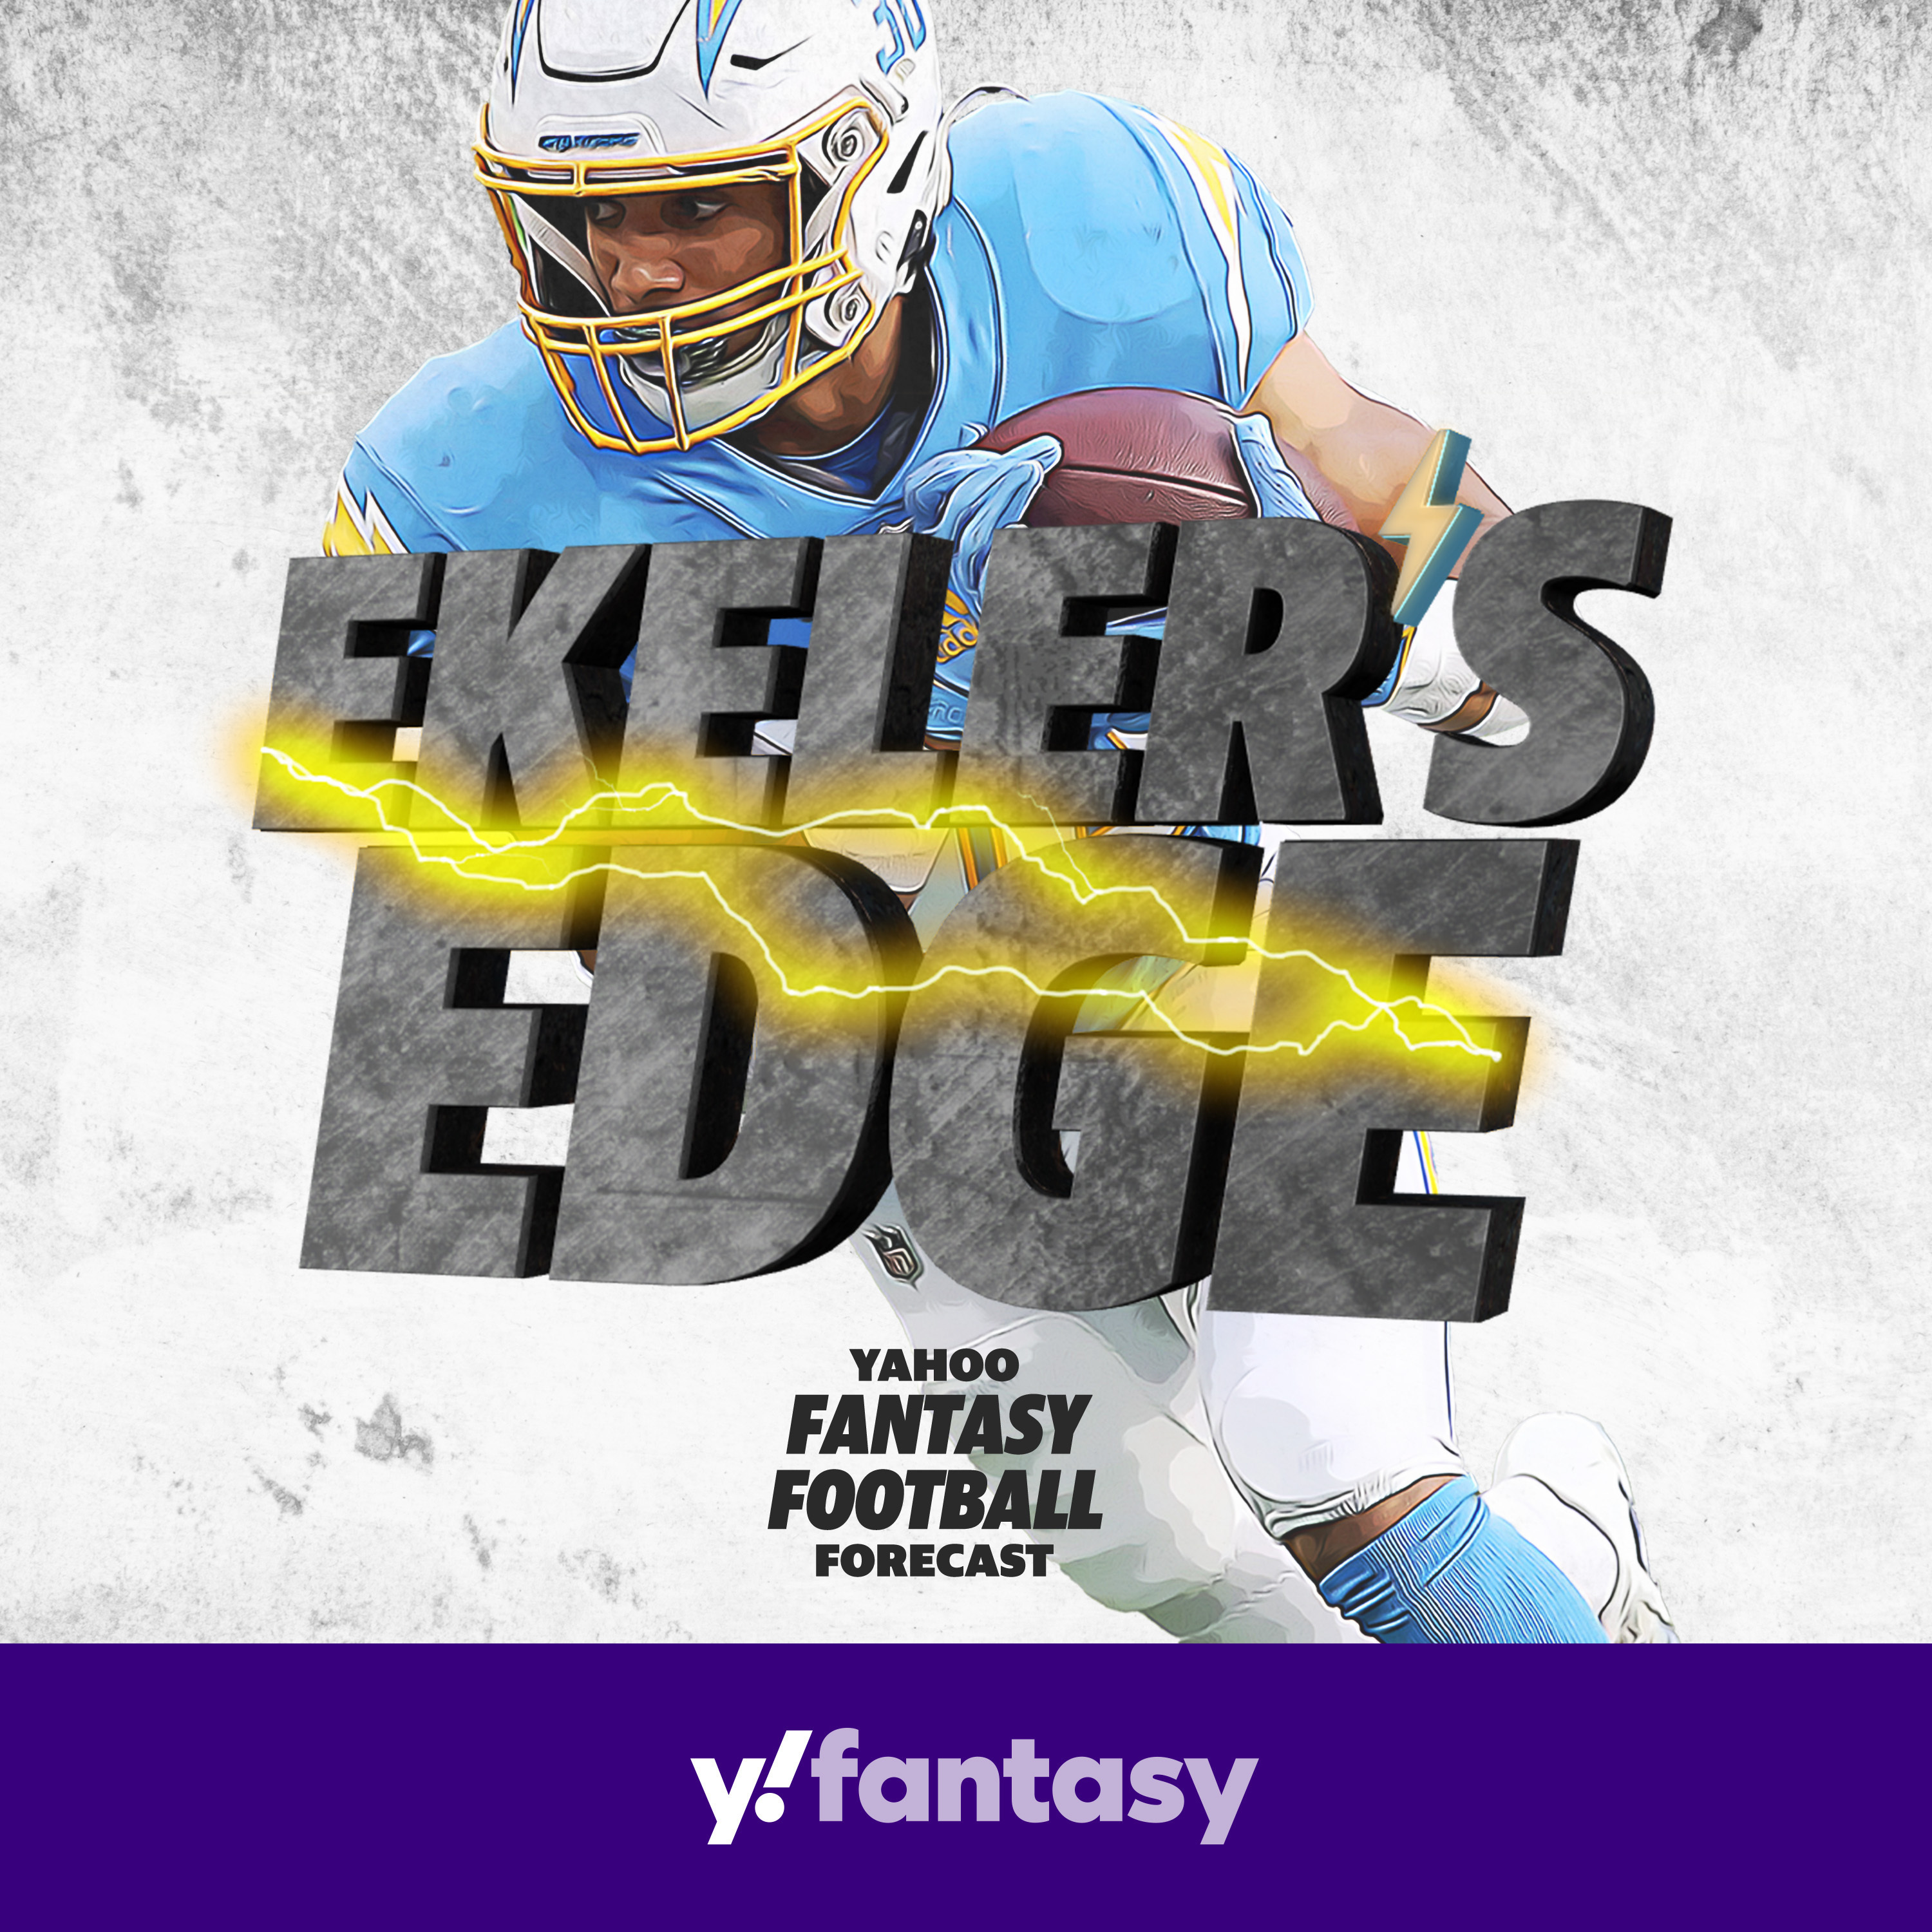 Ekeler’s Edge: Recapping the 2022 season & Chargers/Jaguars playoff preview